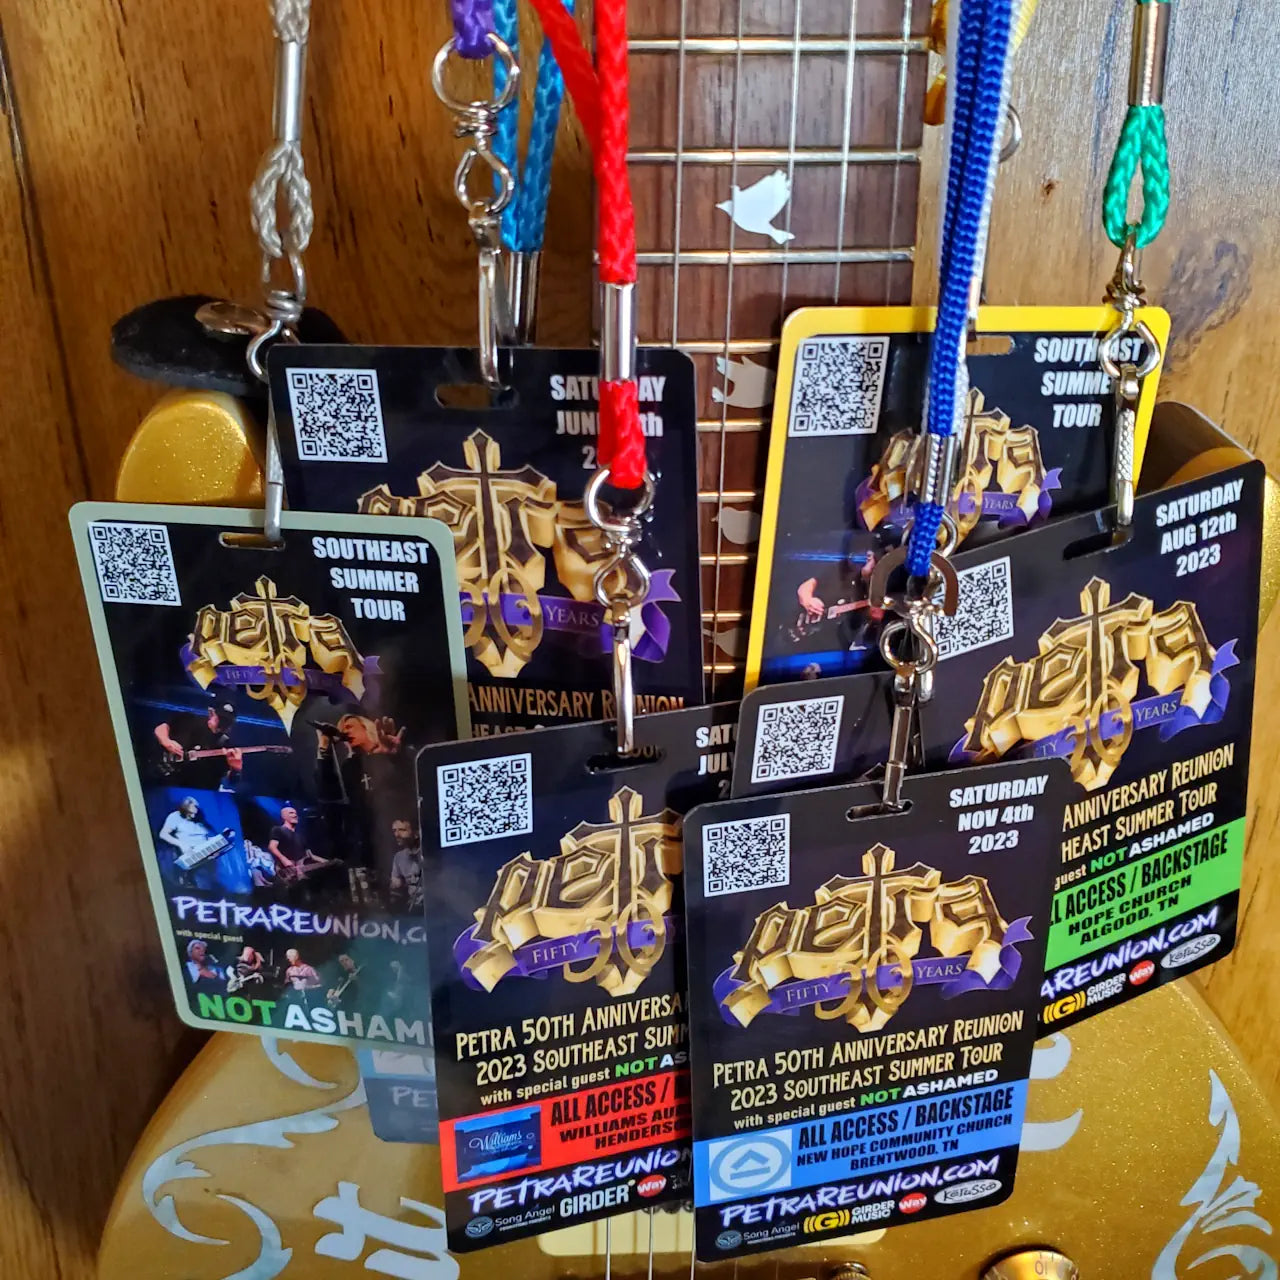 Petra Commemorative Lanyard - 2023 Southeast Summer Tour with NOT ASHAMED - to Support Pakistan School Project